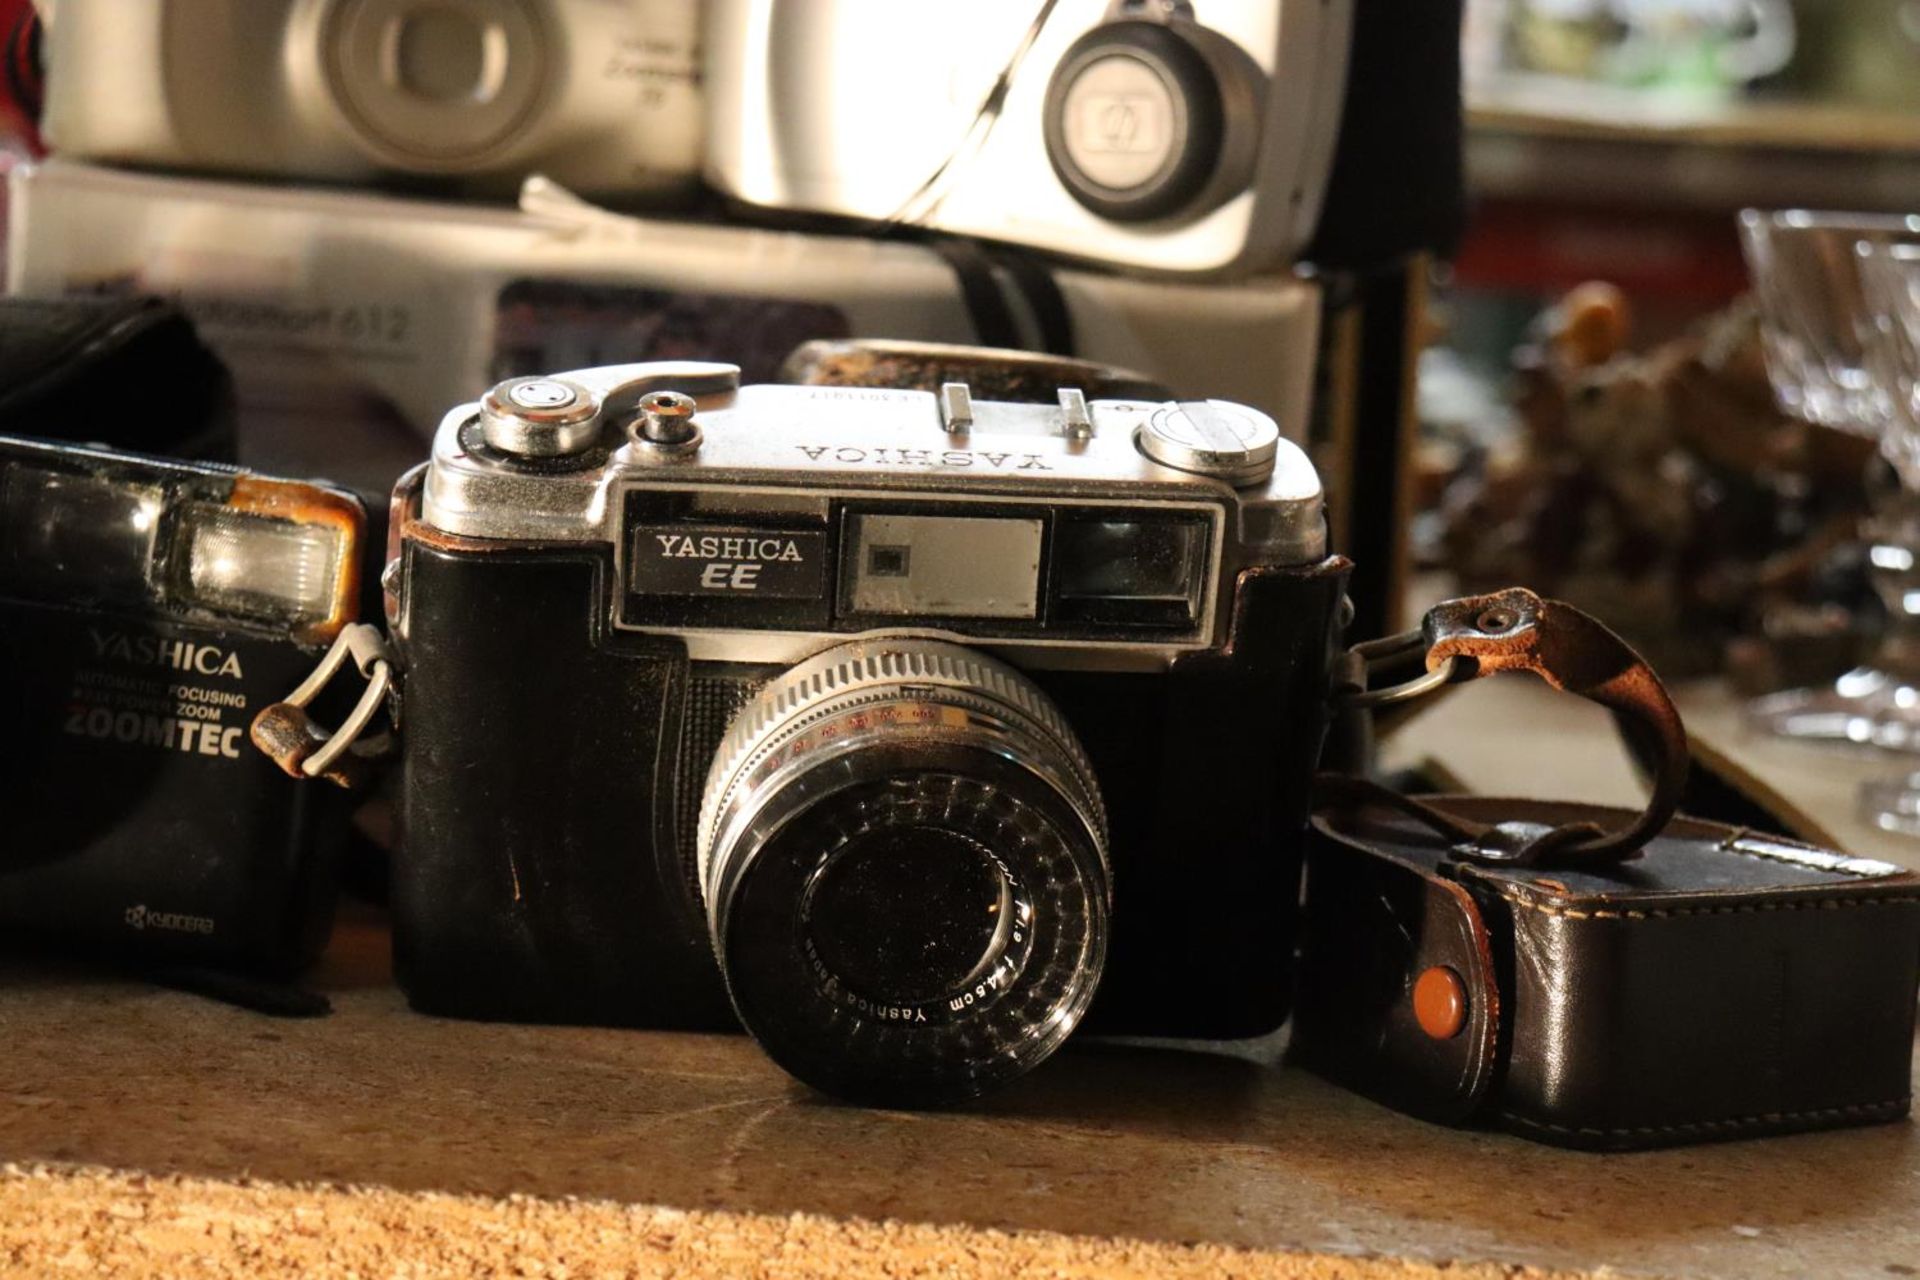 A QUANTITY OF VINTAGE CAMERAS TO INCLUDE YASHICA ZOOMTEC, YASHICA EE, HP, ETC., - Image 2 of 5